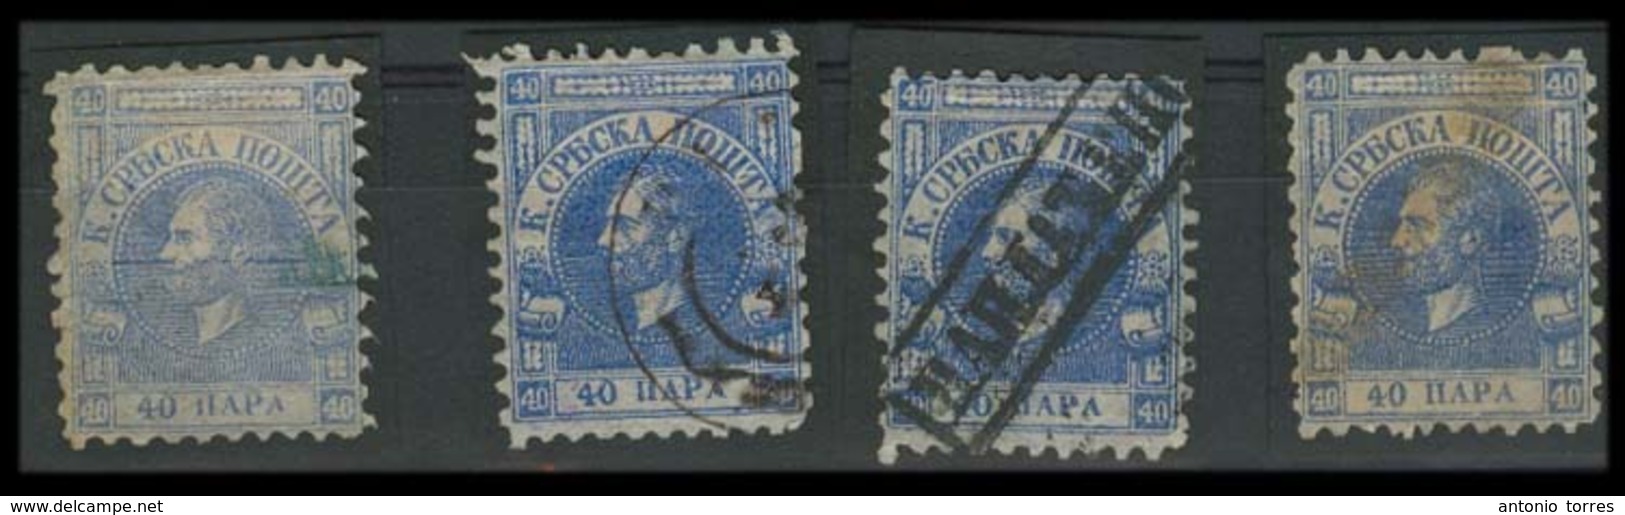 SERBIA. 1866. Yv 7 (x4). 40p X4 Used Diff Plate Verieties, Shades / Cancels. Mostly Fine. - Serbia